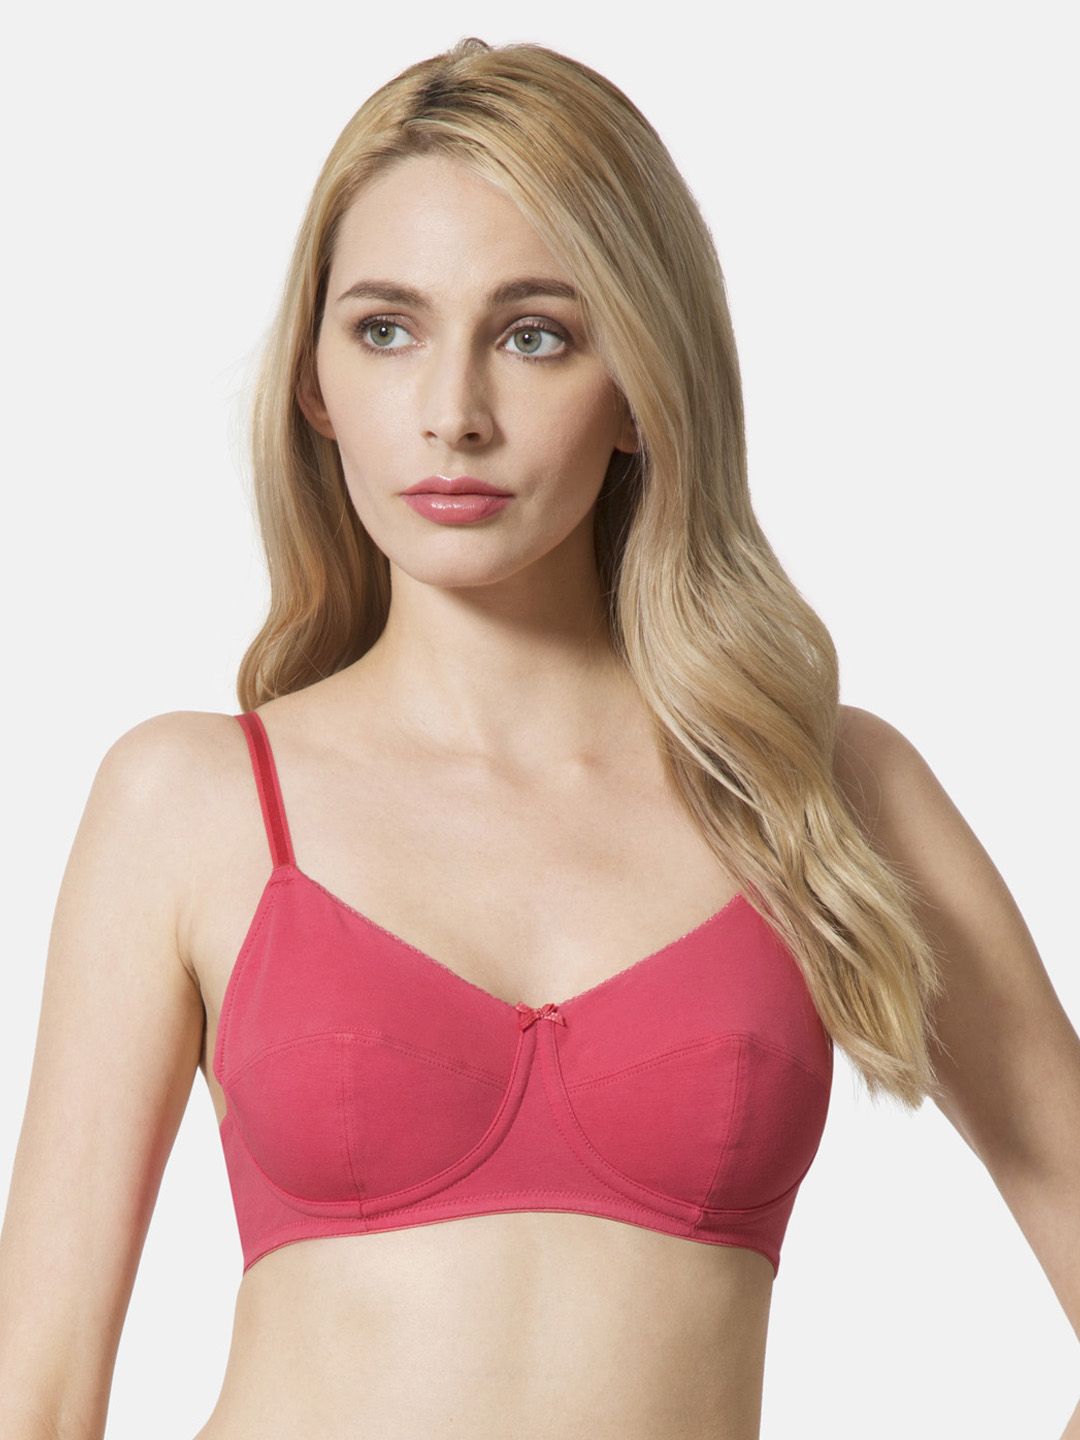 Van Heusen Coral Solid Non-Wired Non Padded Antibacterial Everyday Bra ILIBRACSSWW1211005 Price in India